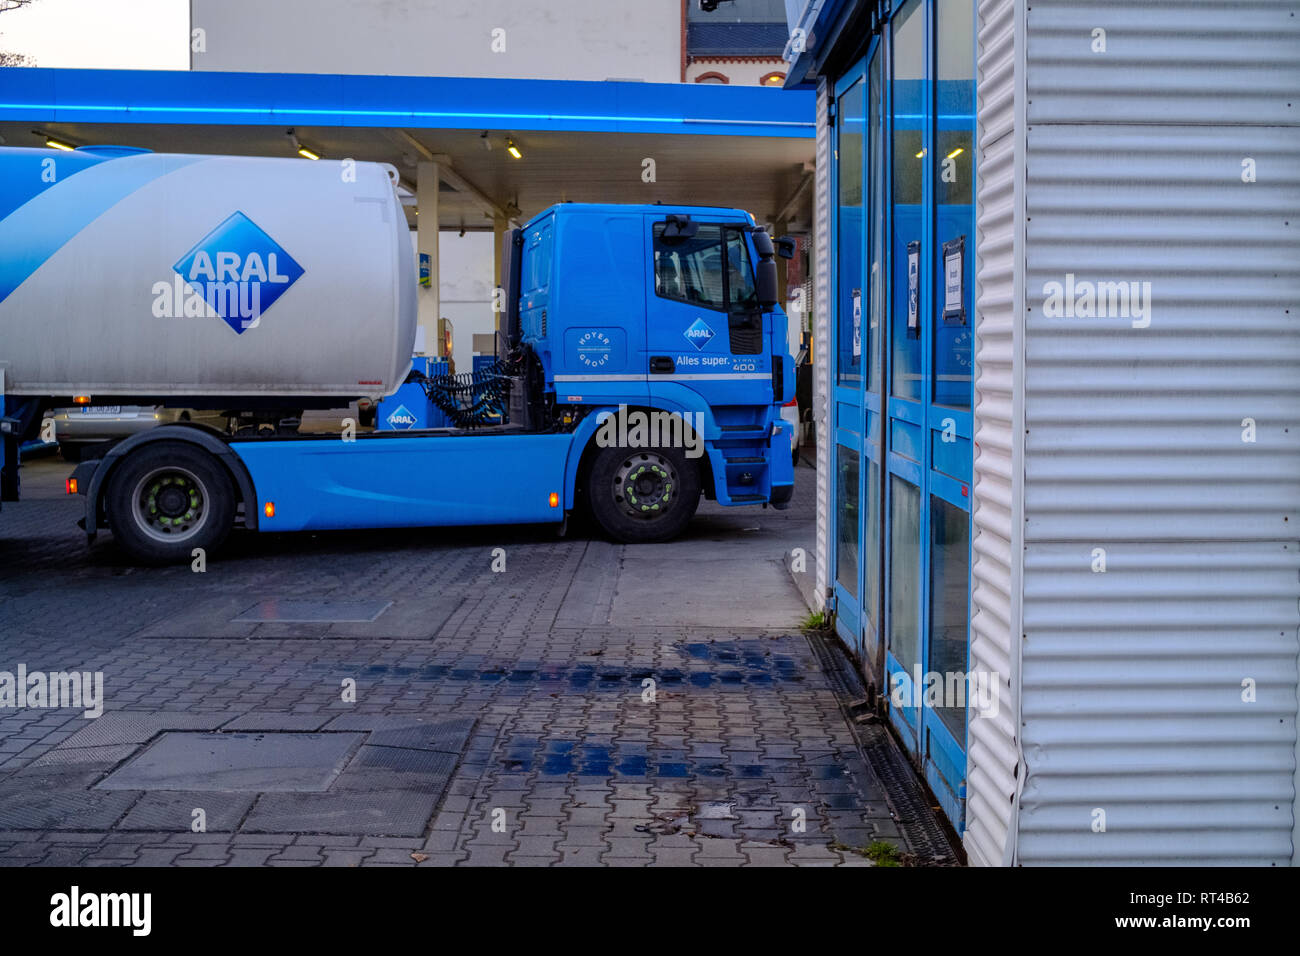 Branded tanker truck at an Aral gas station in Berlin, Germany, displays the brand's German slogan 'Alles super.'. Stock Photo